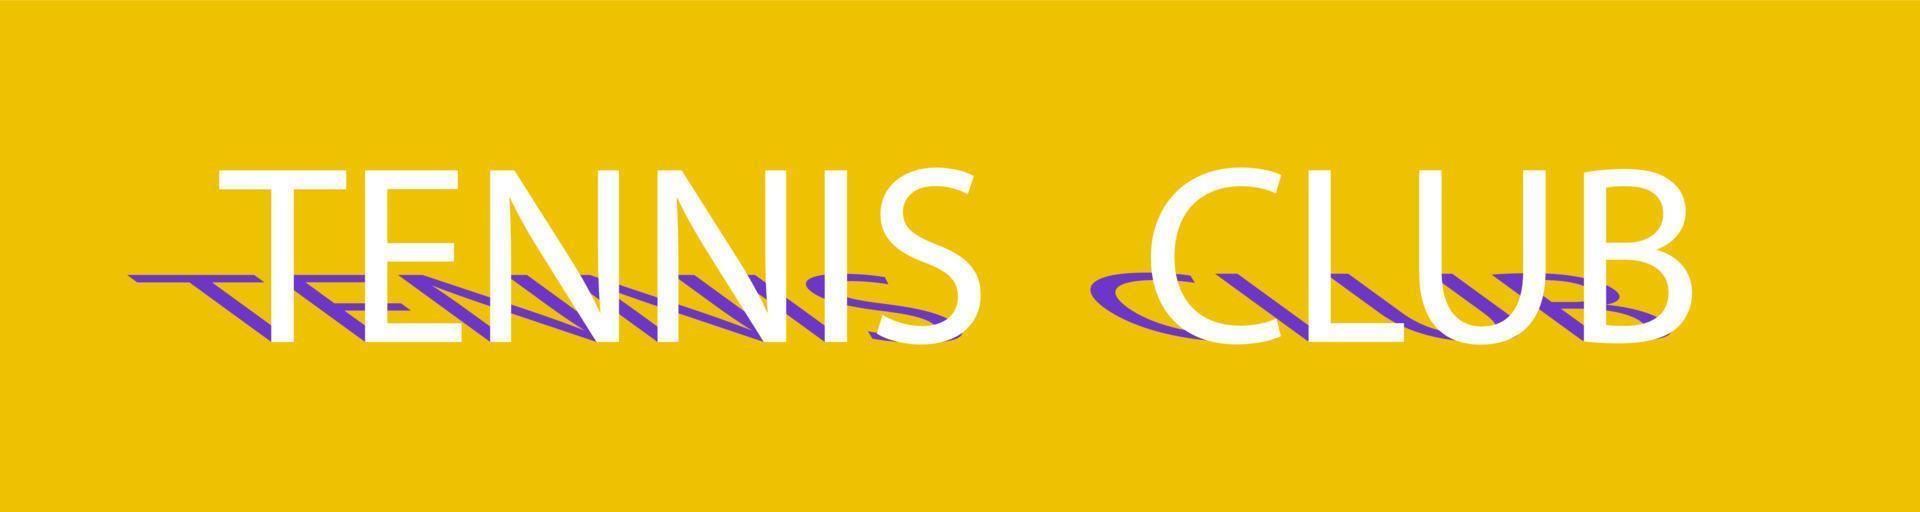 Tennis club banner. Vector white text with purple shadow on yellow background. Sports tennis banner with the inscription.